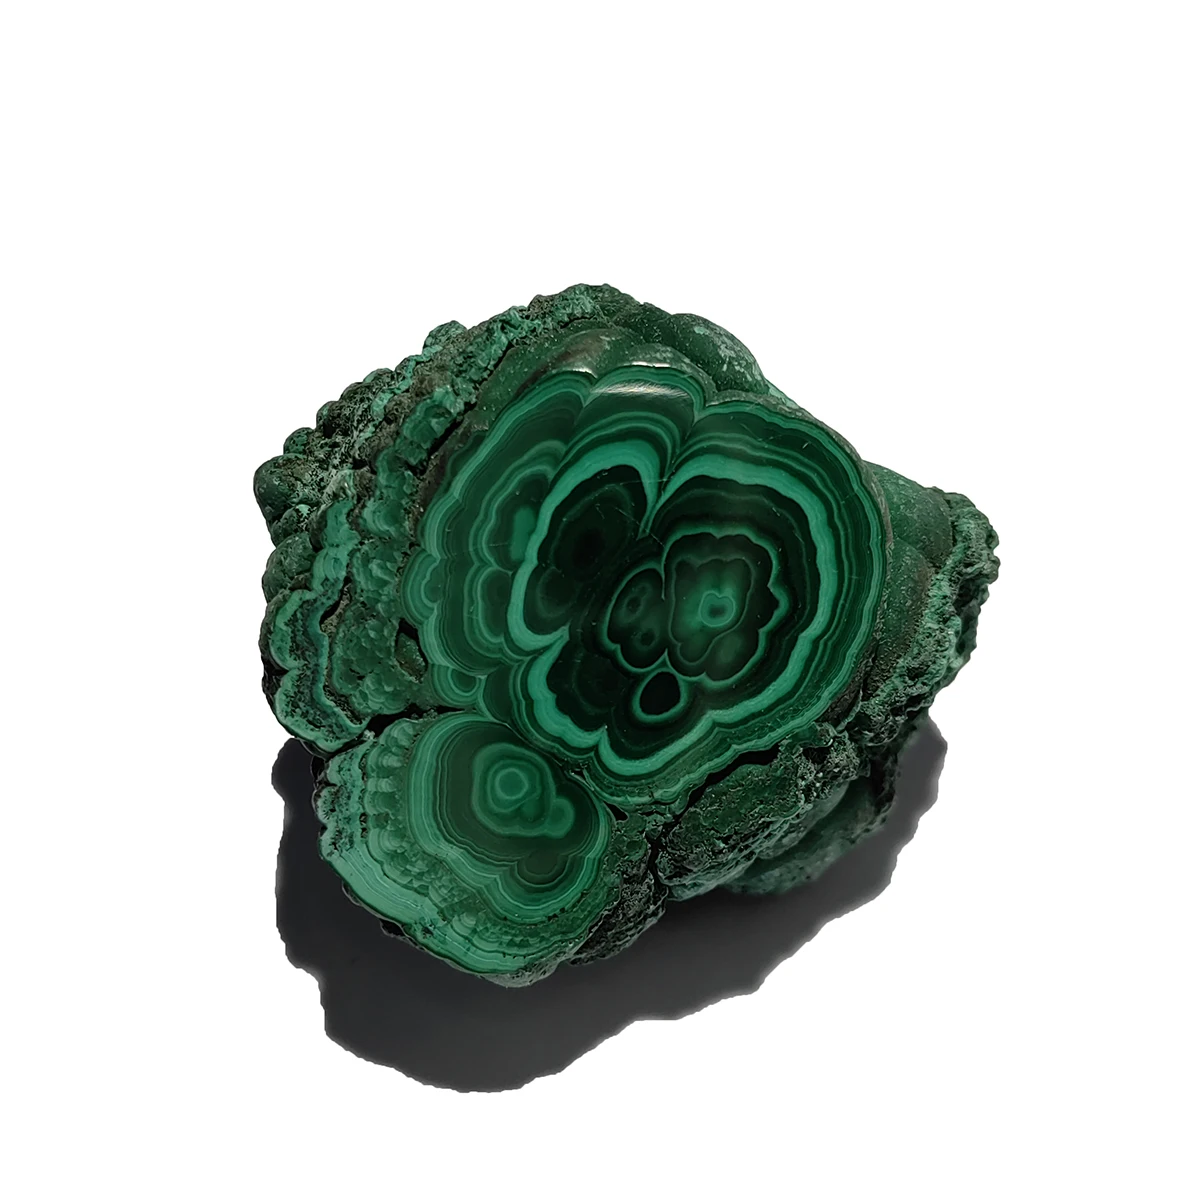 

C3-2A 1PCS 100% Natural Malachite Polished Mineral Rough Stone Slices Quartz and Crystals Repair Crystal Teaching Specimens